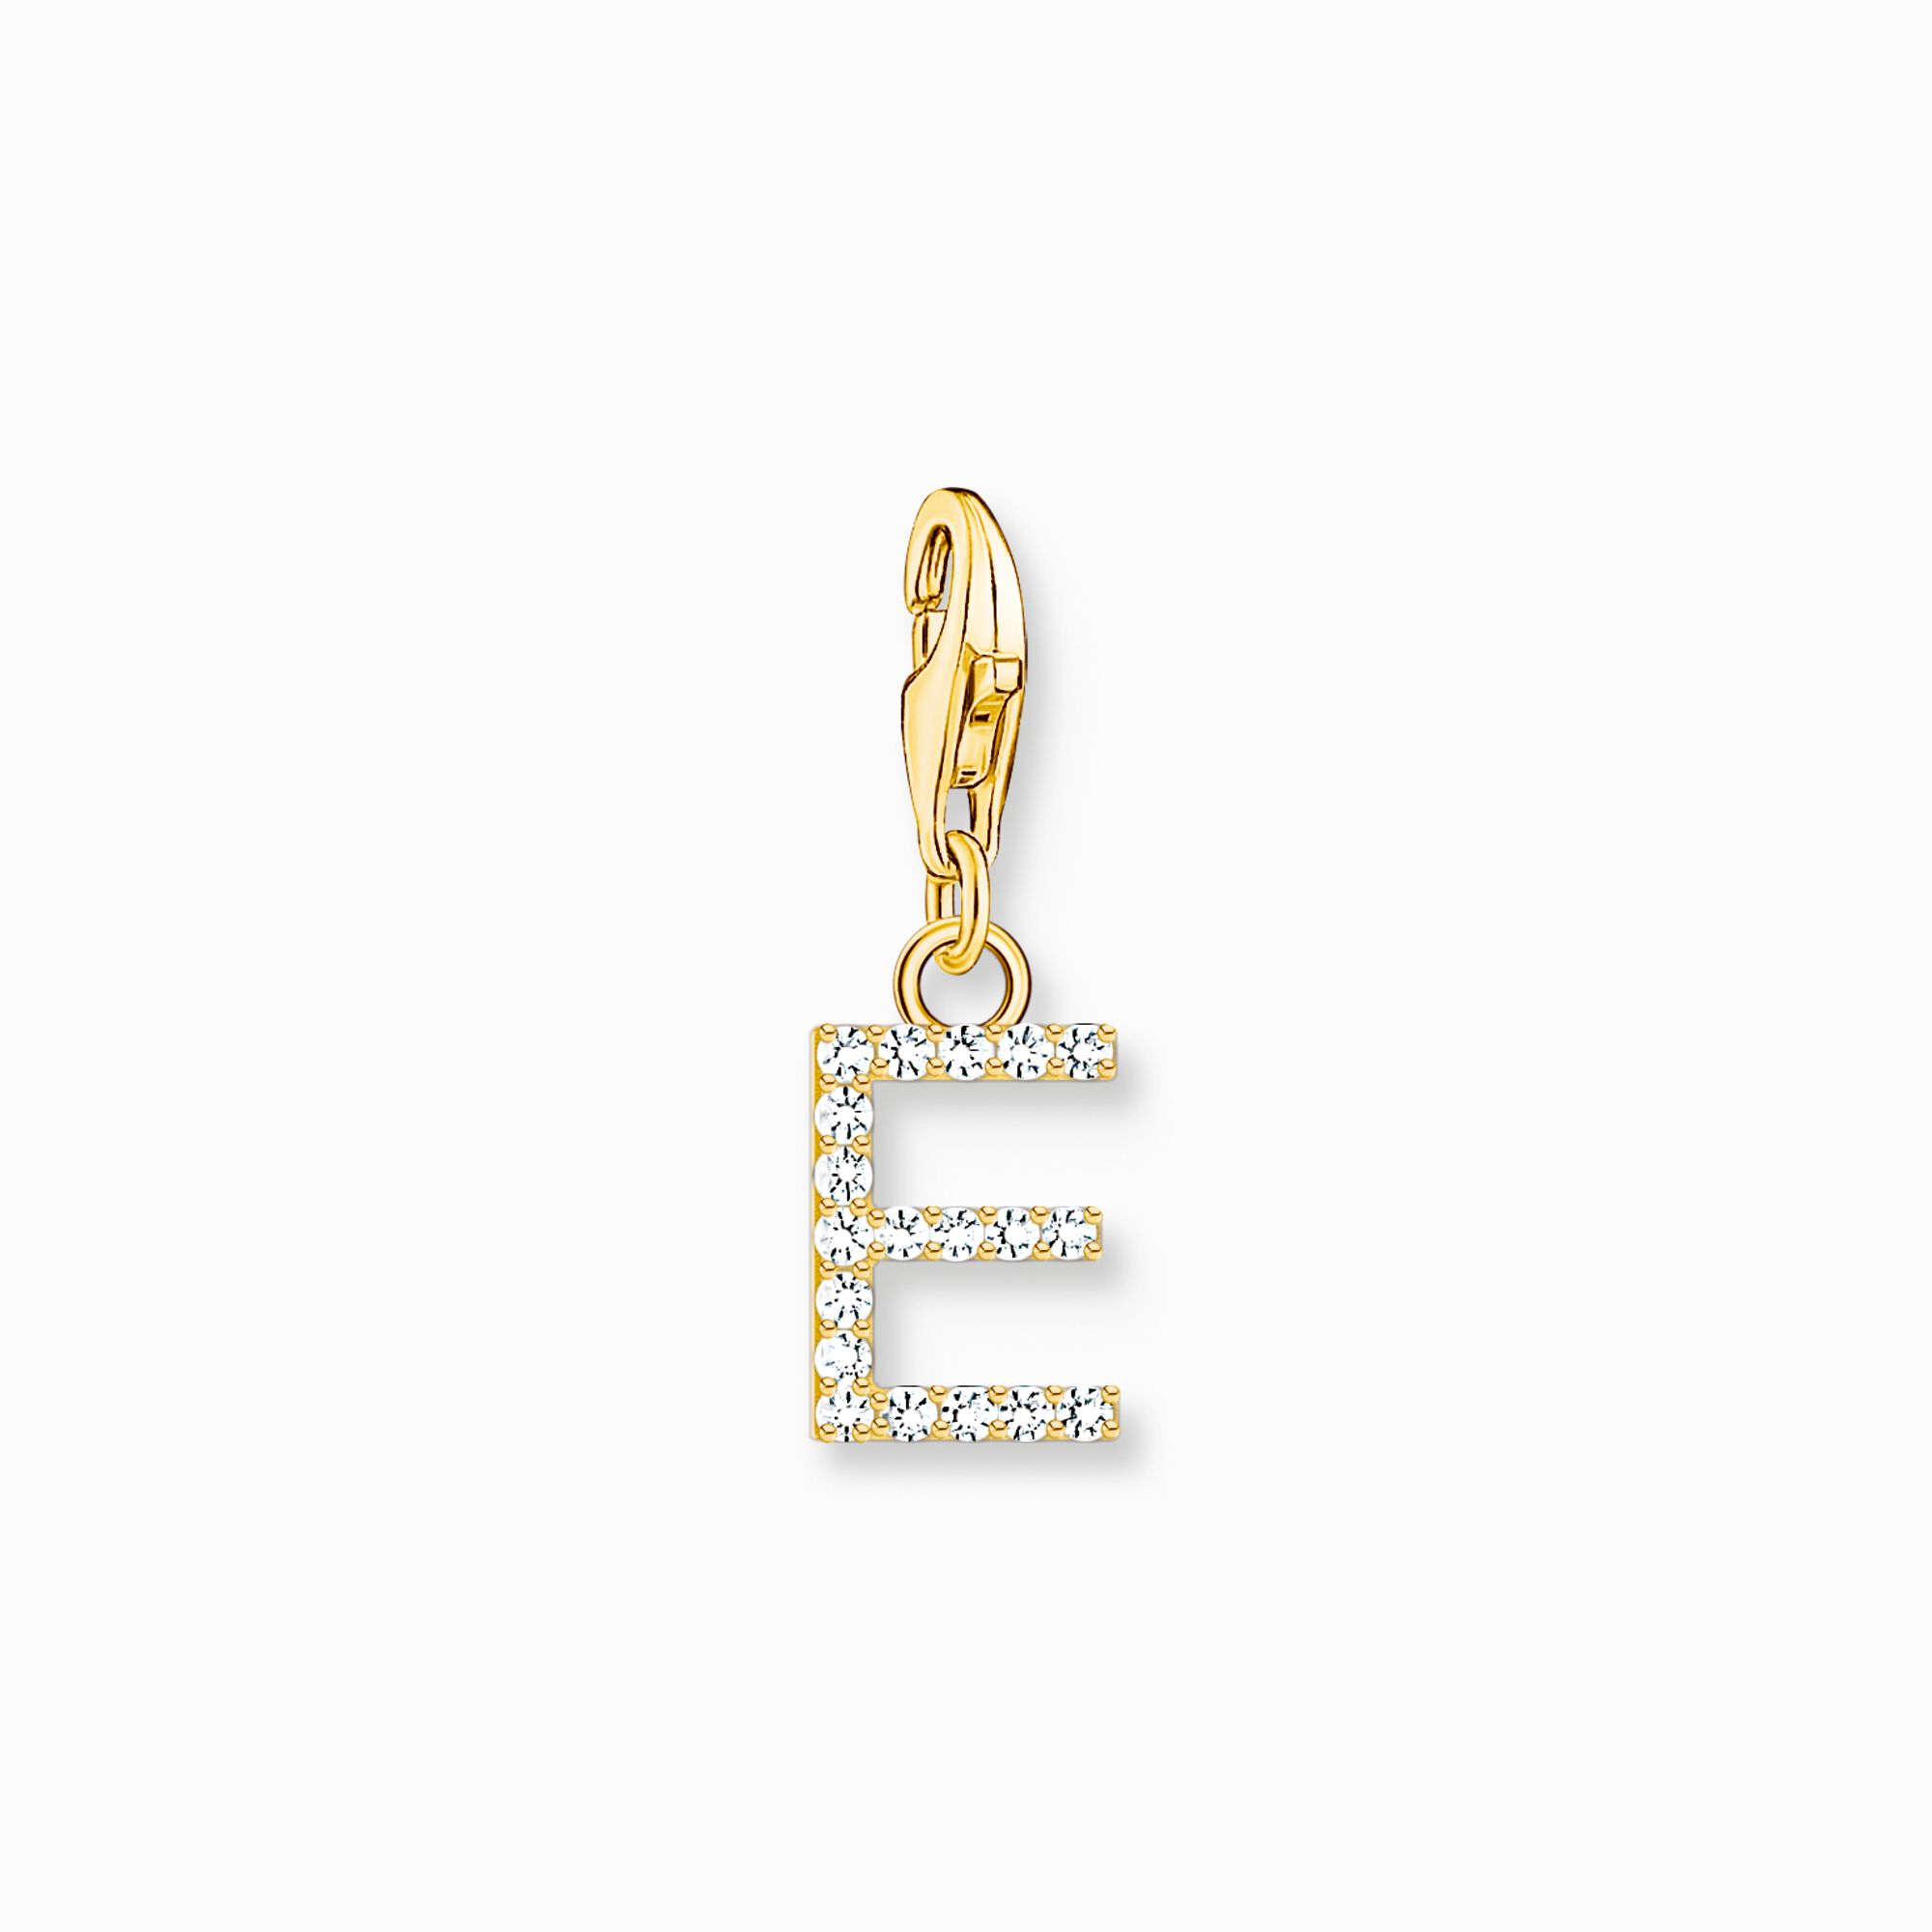 Charm pendant letter E with white stones gold plated from the Charm Club collection in the THOMAS SABO online store